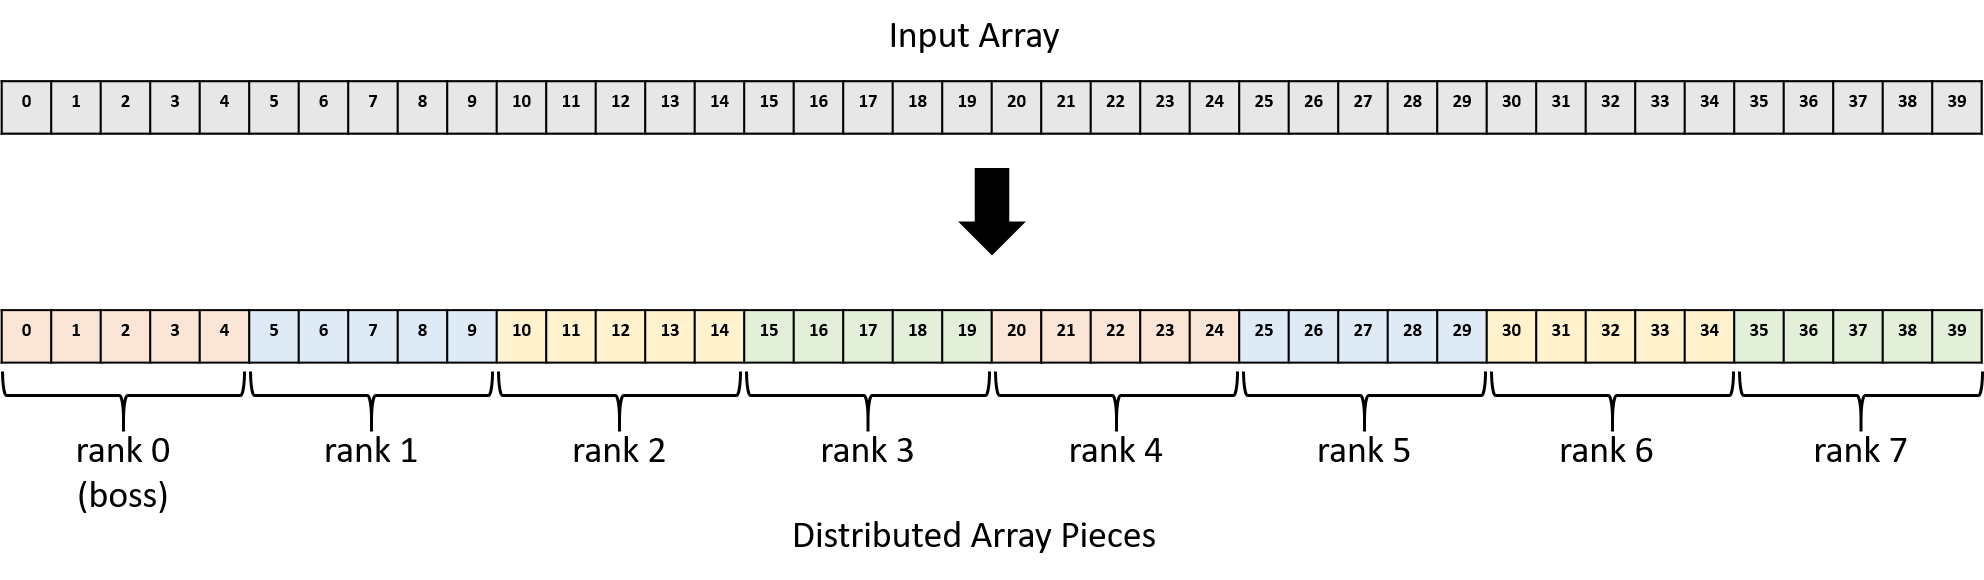 Each chunk of five array elements is distributed to the next process.  For example, elements 0-4 are assigned to rank 0, elements 5-9 are assigned to rank 1, elements 10-14 are assigned to rank 2, and the patter continues until elements 35-39 are assigned to rank 7.